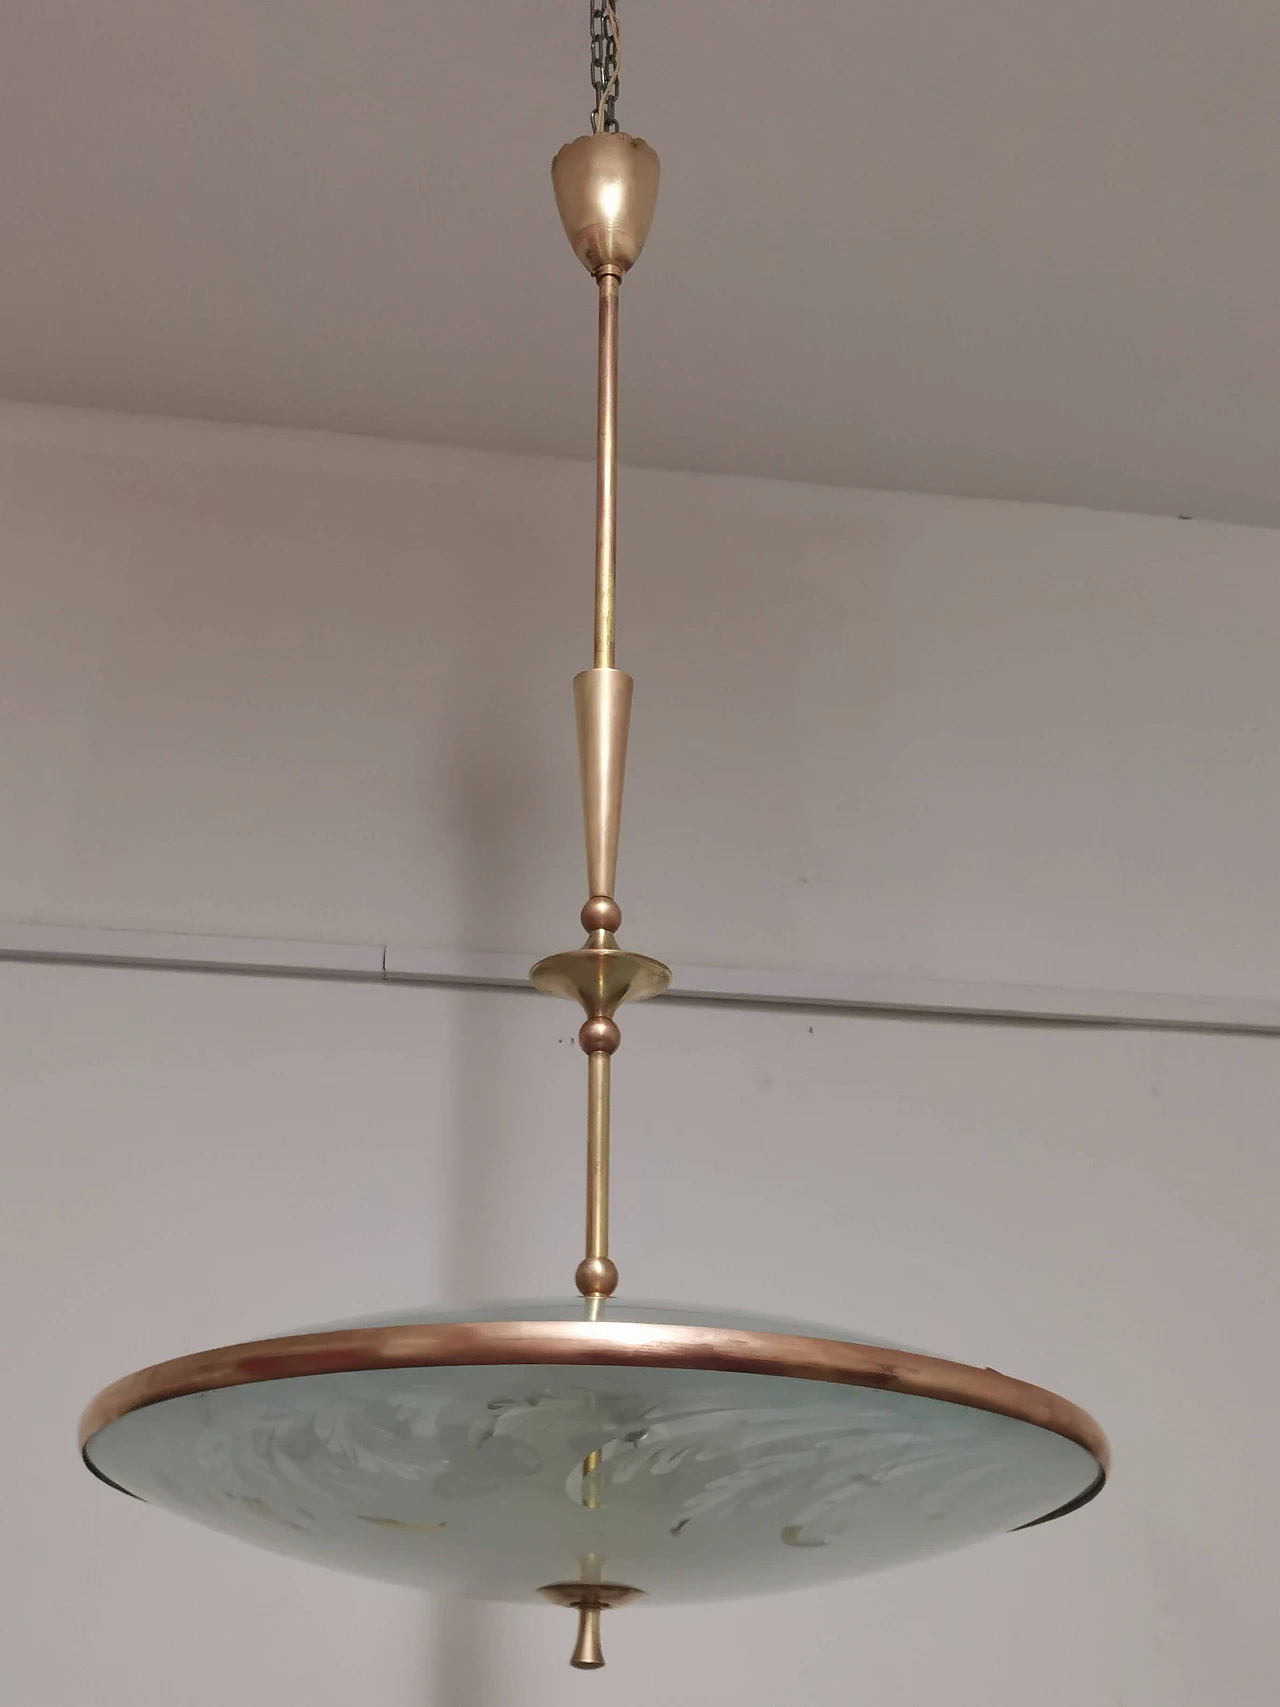 Suspension lamp by Pietro Chiesa for Fontana Arte, 1940s 1372282